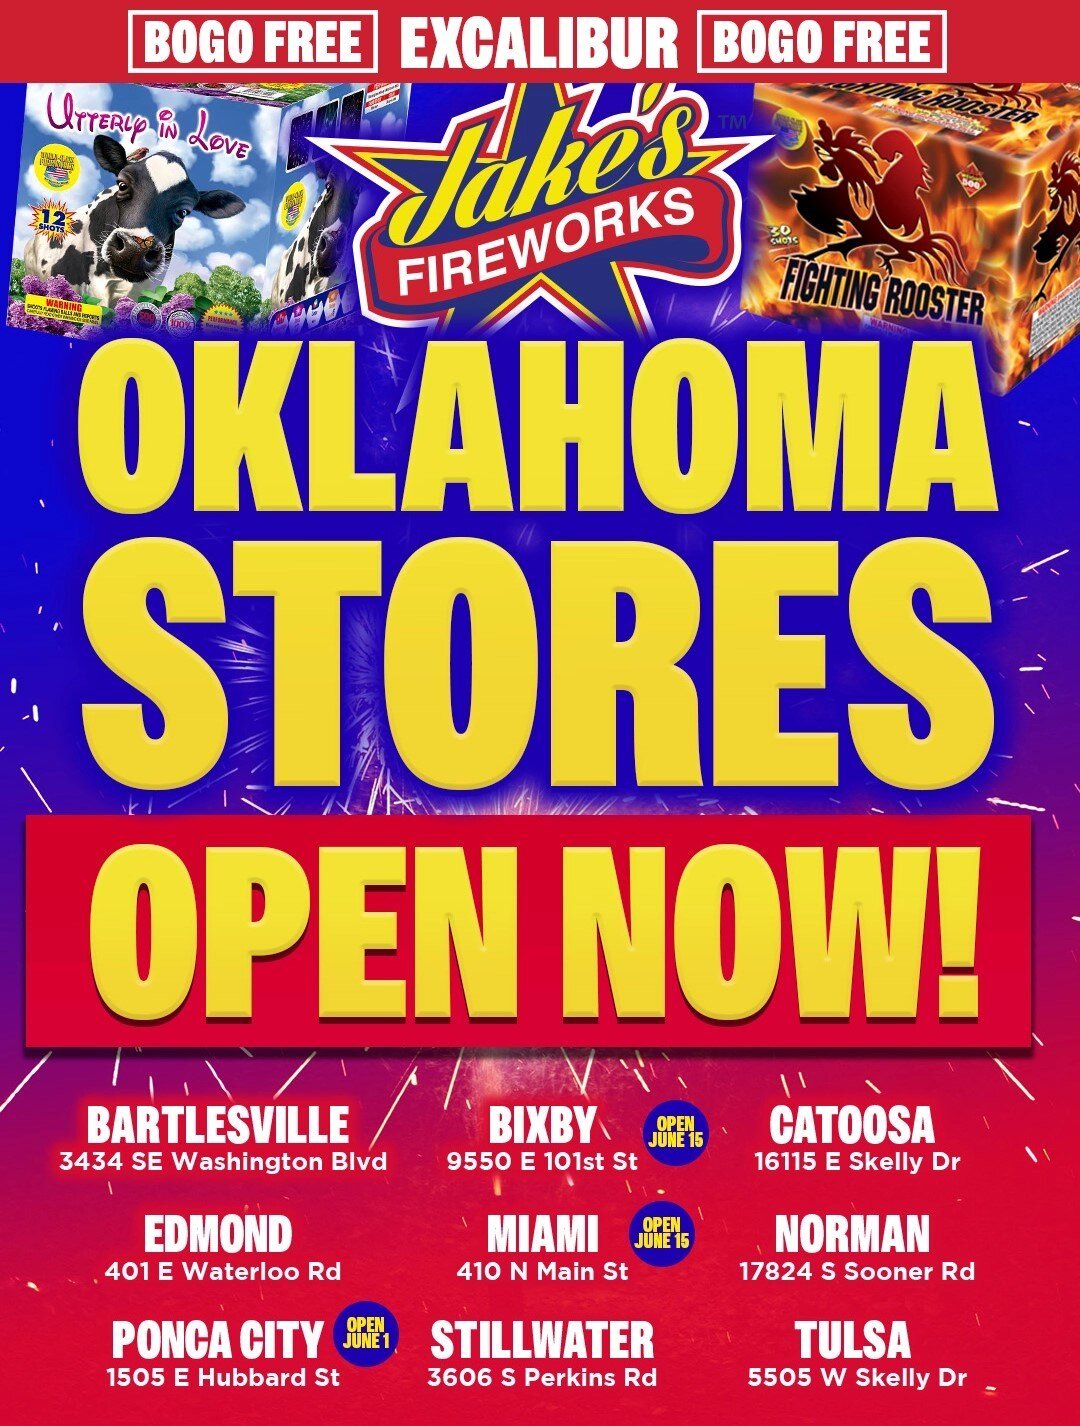 Oklahoma Stores Now OPEN - Buy One Get One FREE Excalibur Coupon - 1 Day Only